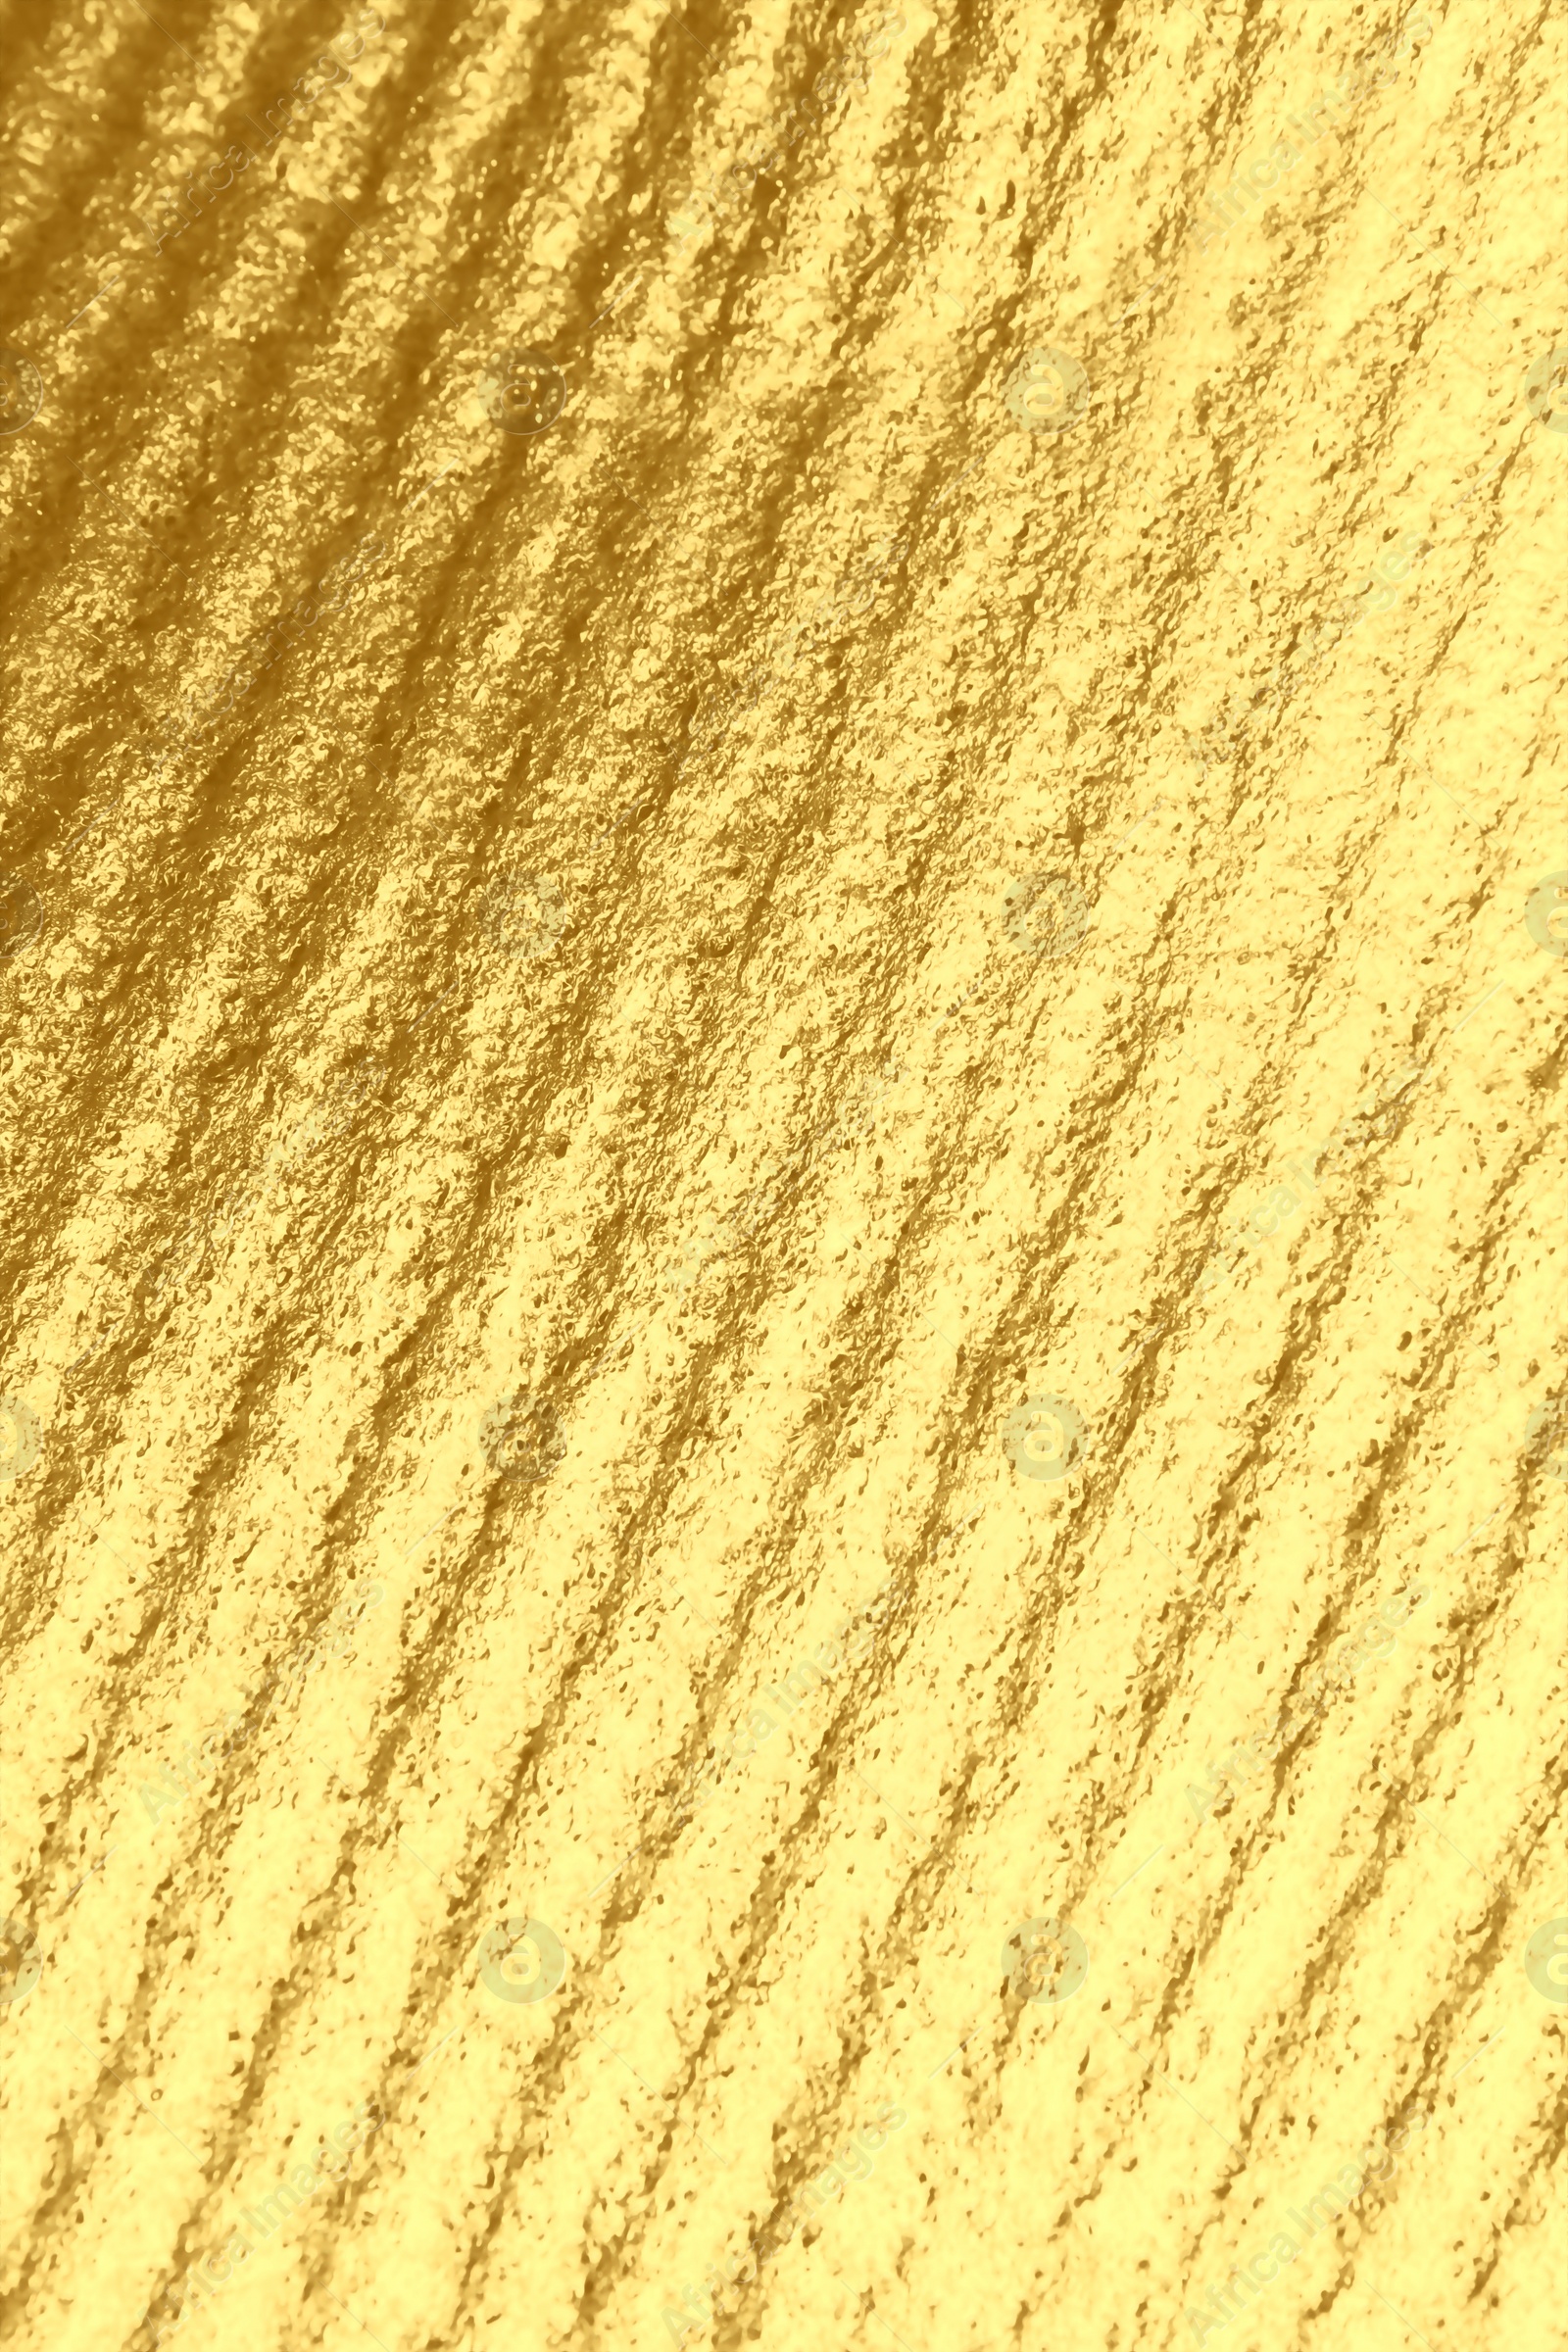 Image of Corrugated golden texture as background, closeup view